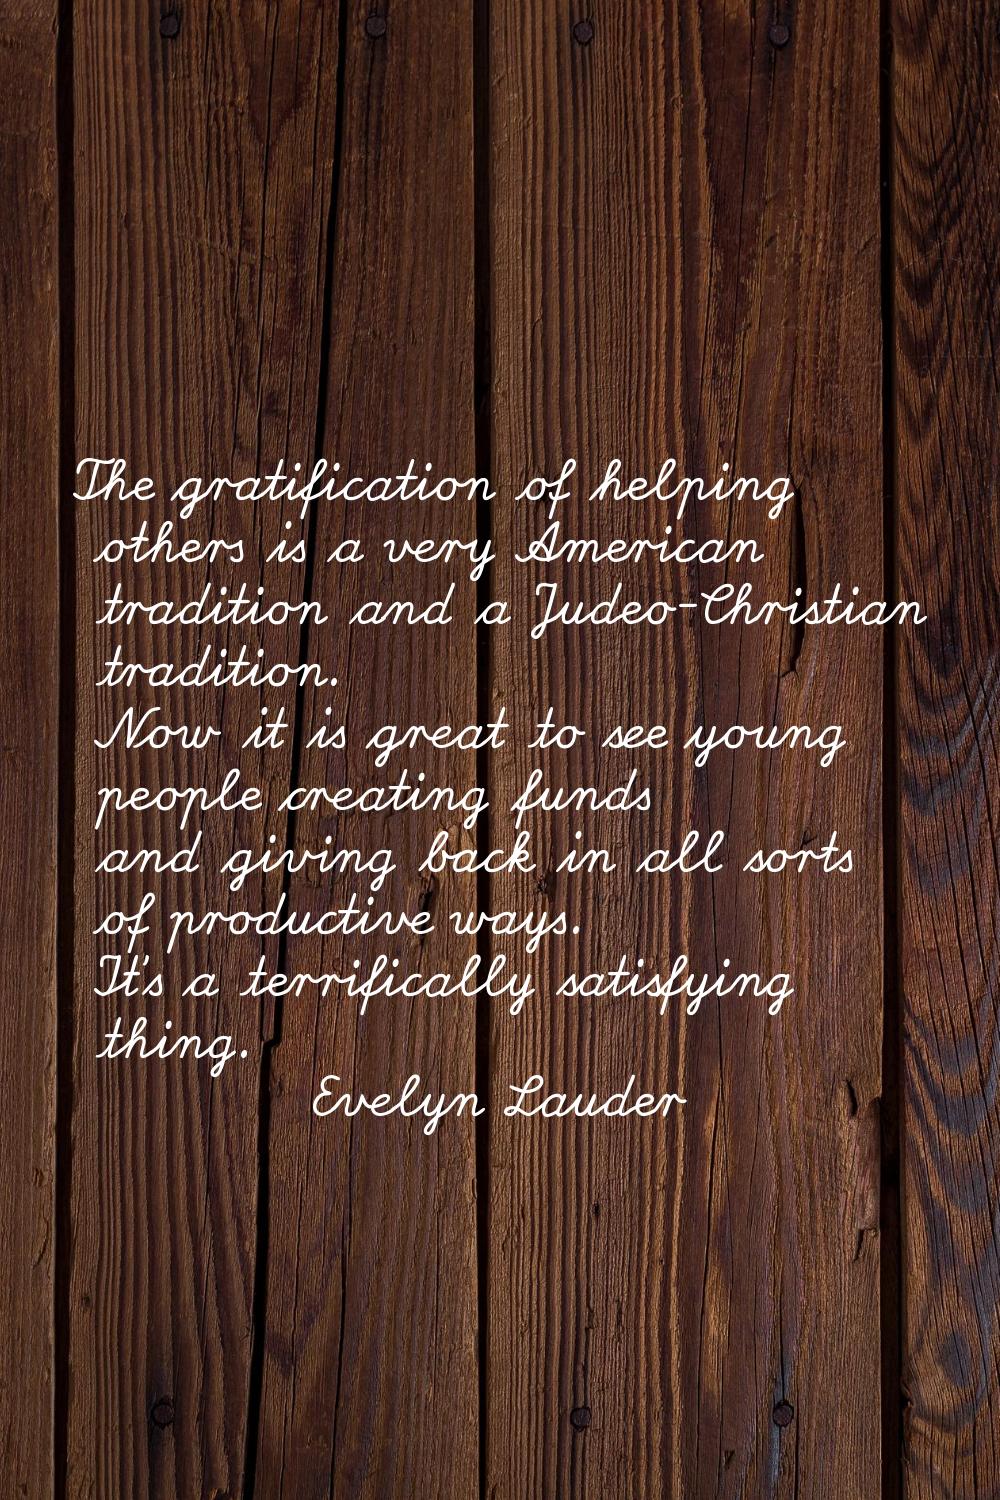 The gratification of helping others is a very American tradition and a Judeo-Christian tradition. N